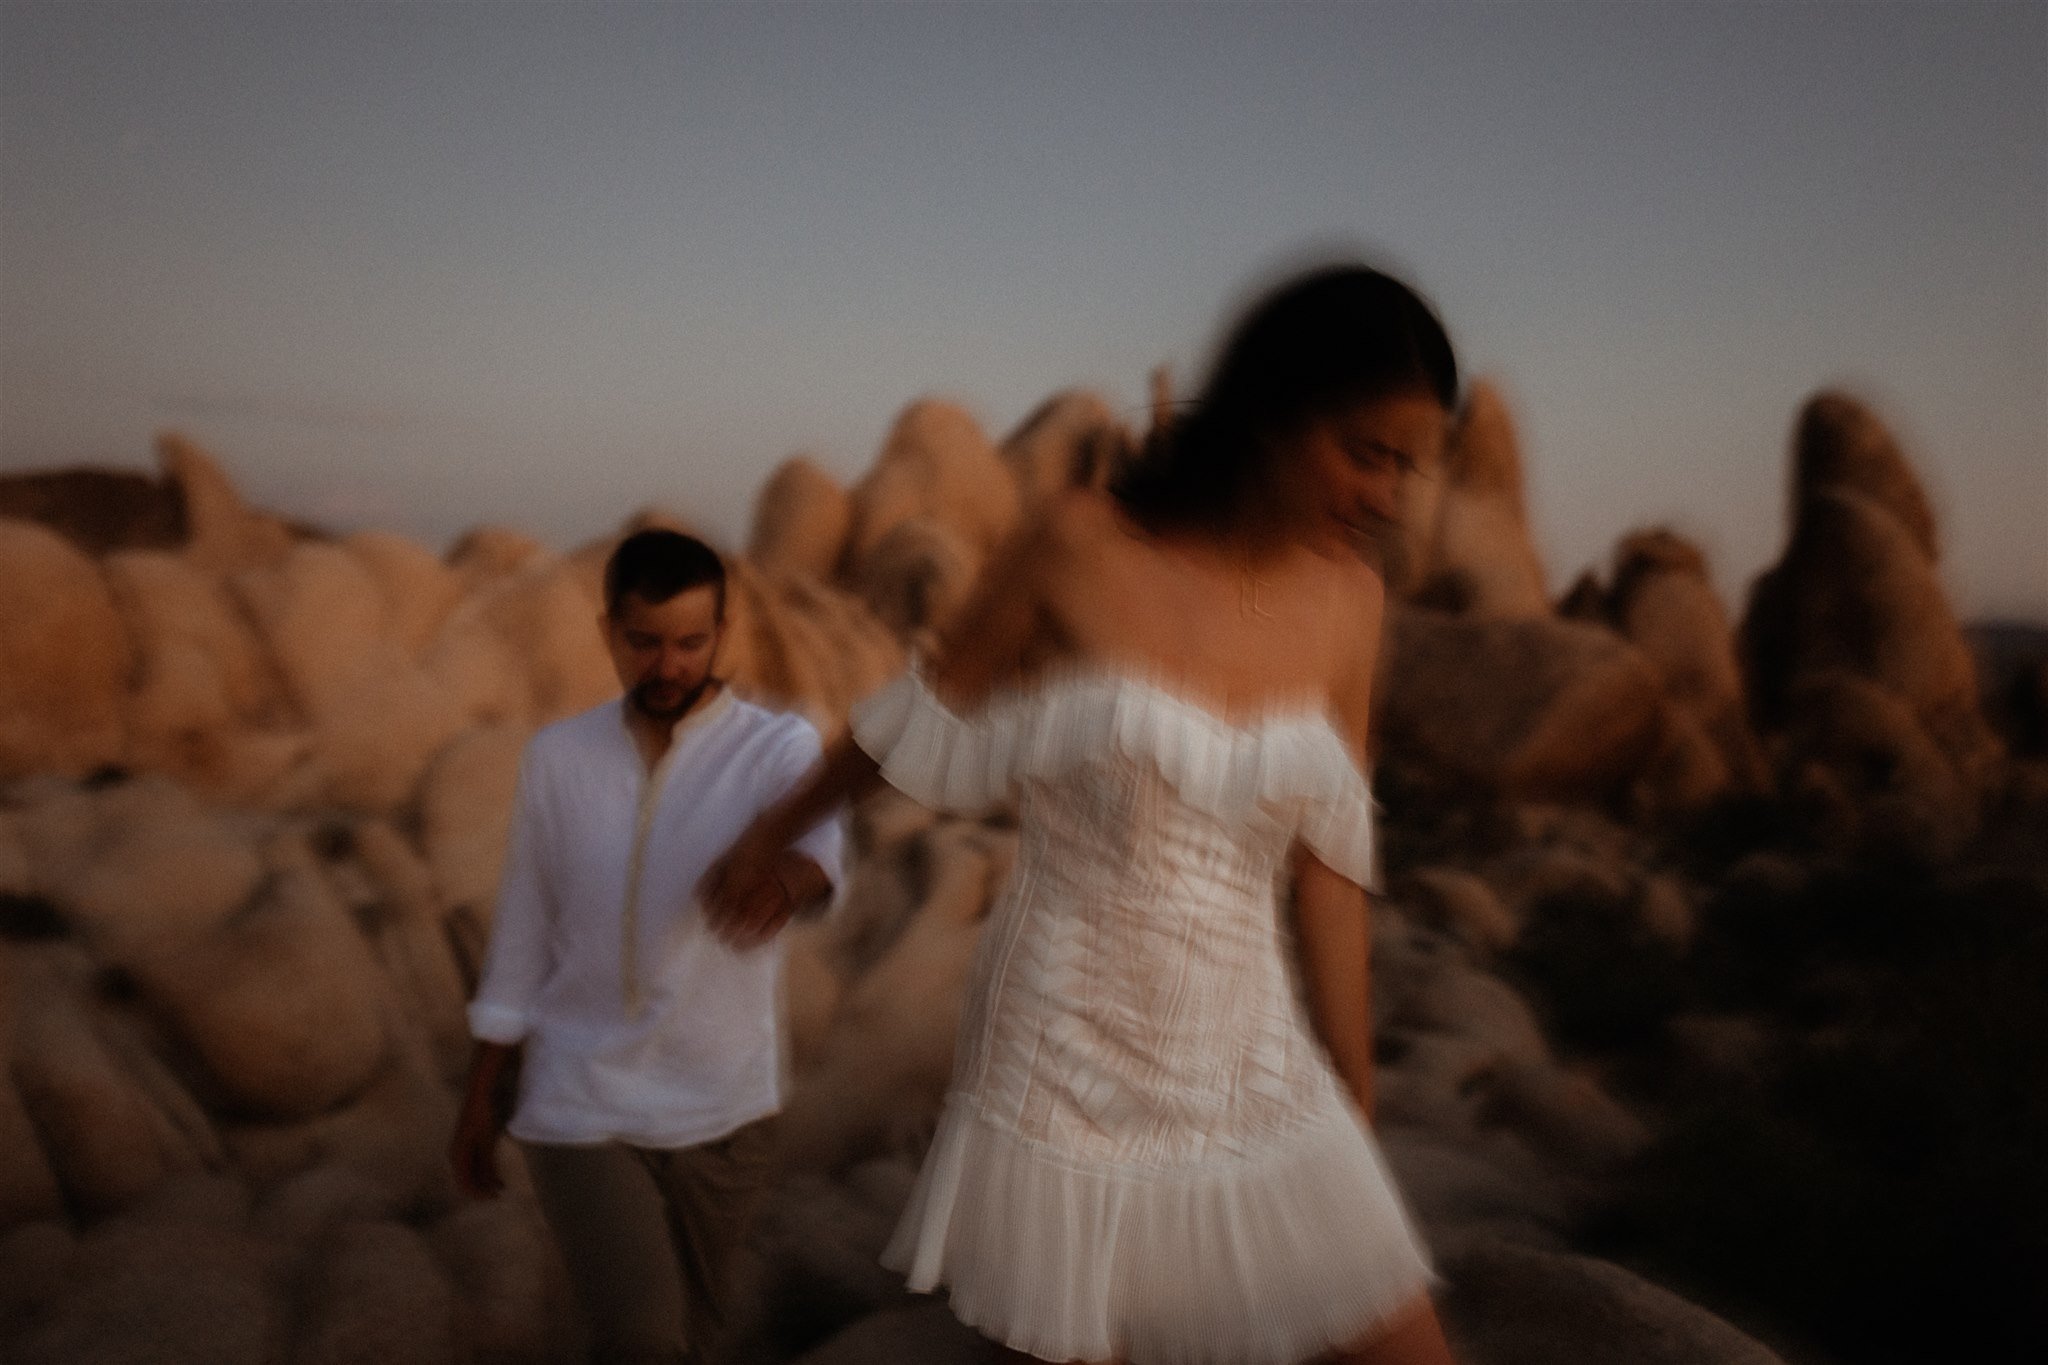 Joshua Tree Couples Session Surprise Proposal - Will Khoury Photography_49.jpg